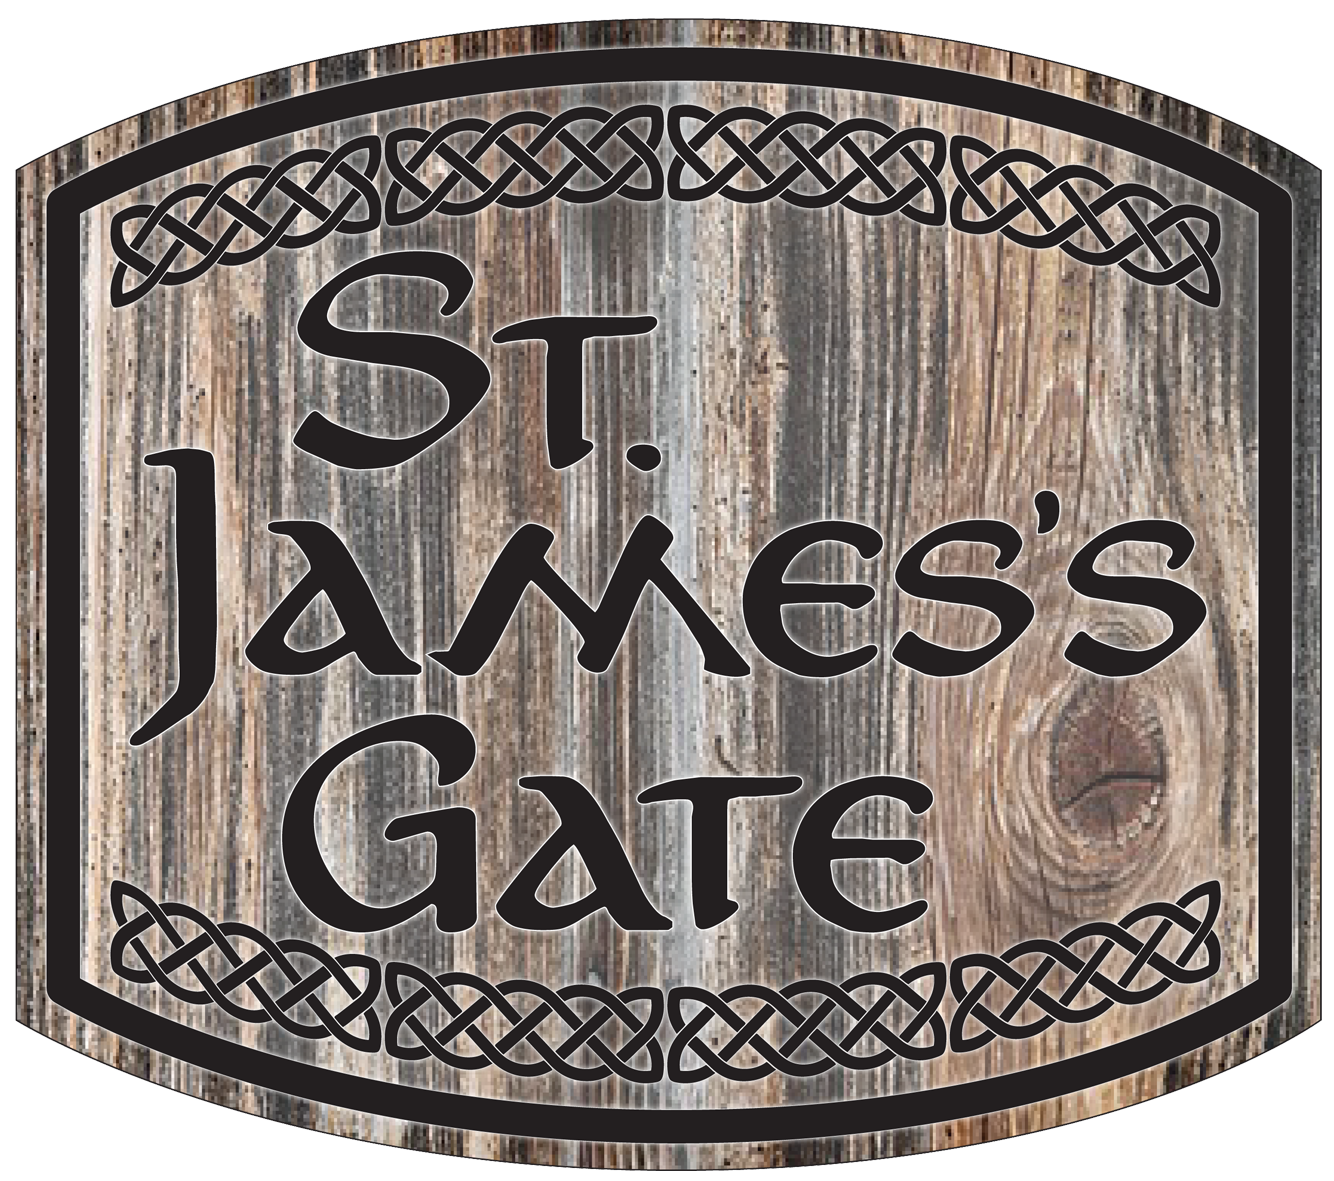 St. James's Gate - Modern Irish Music in the Celtic Tradition - Booking